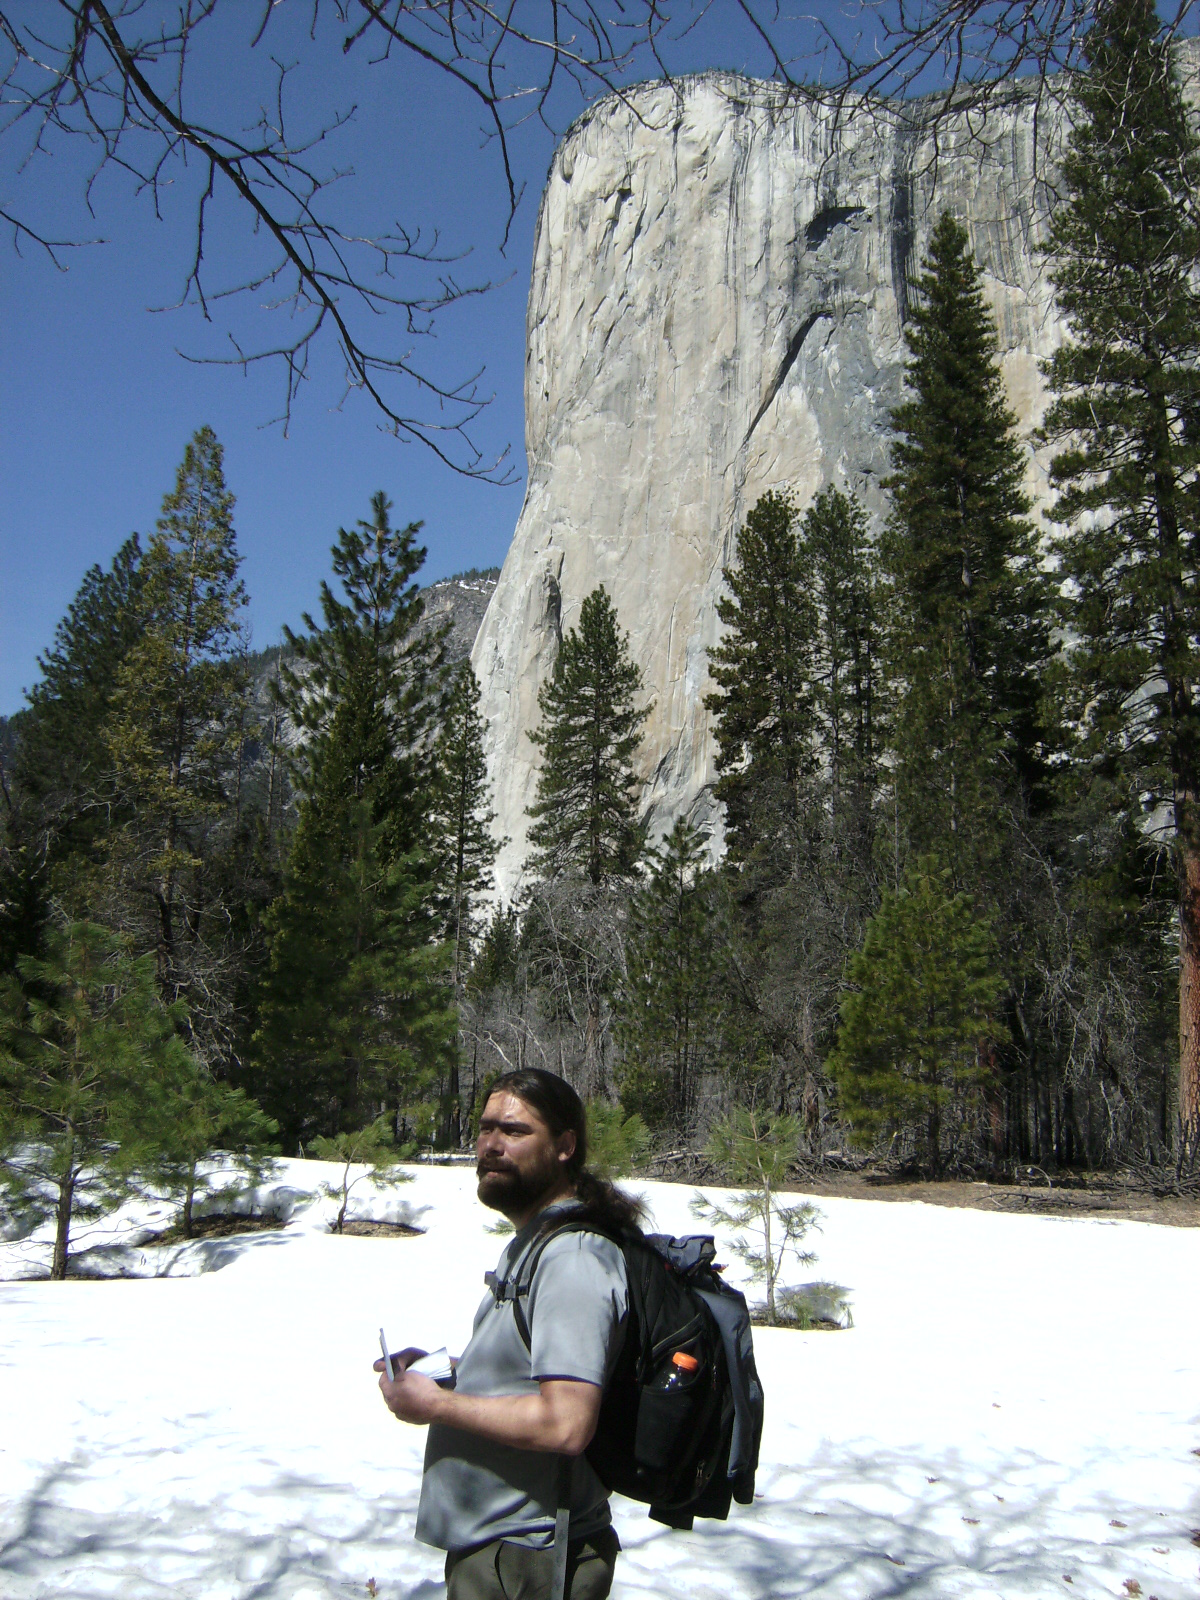 El Capitan and a large hairy guy - 03/18/09